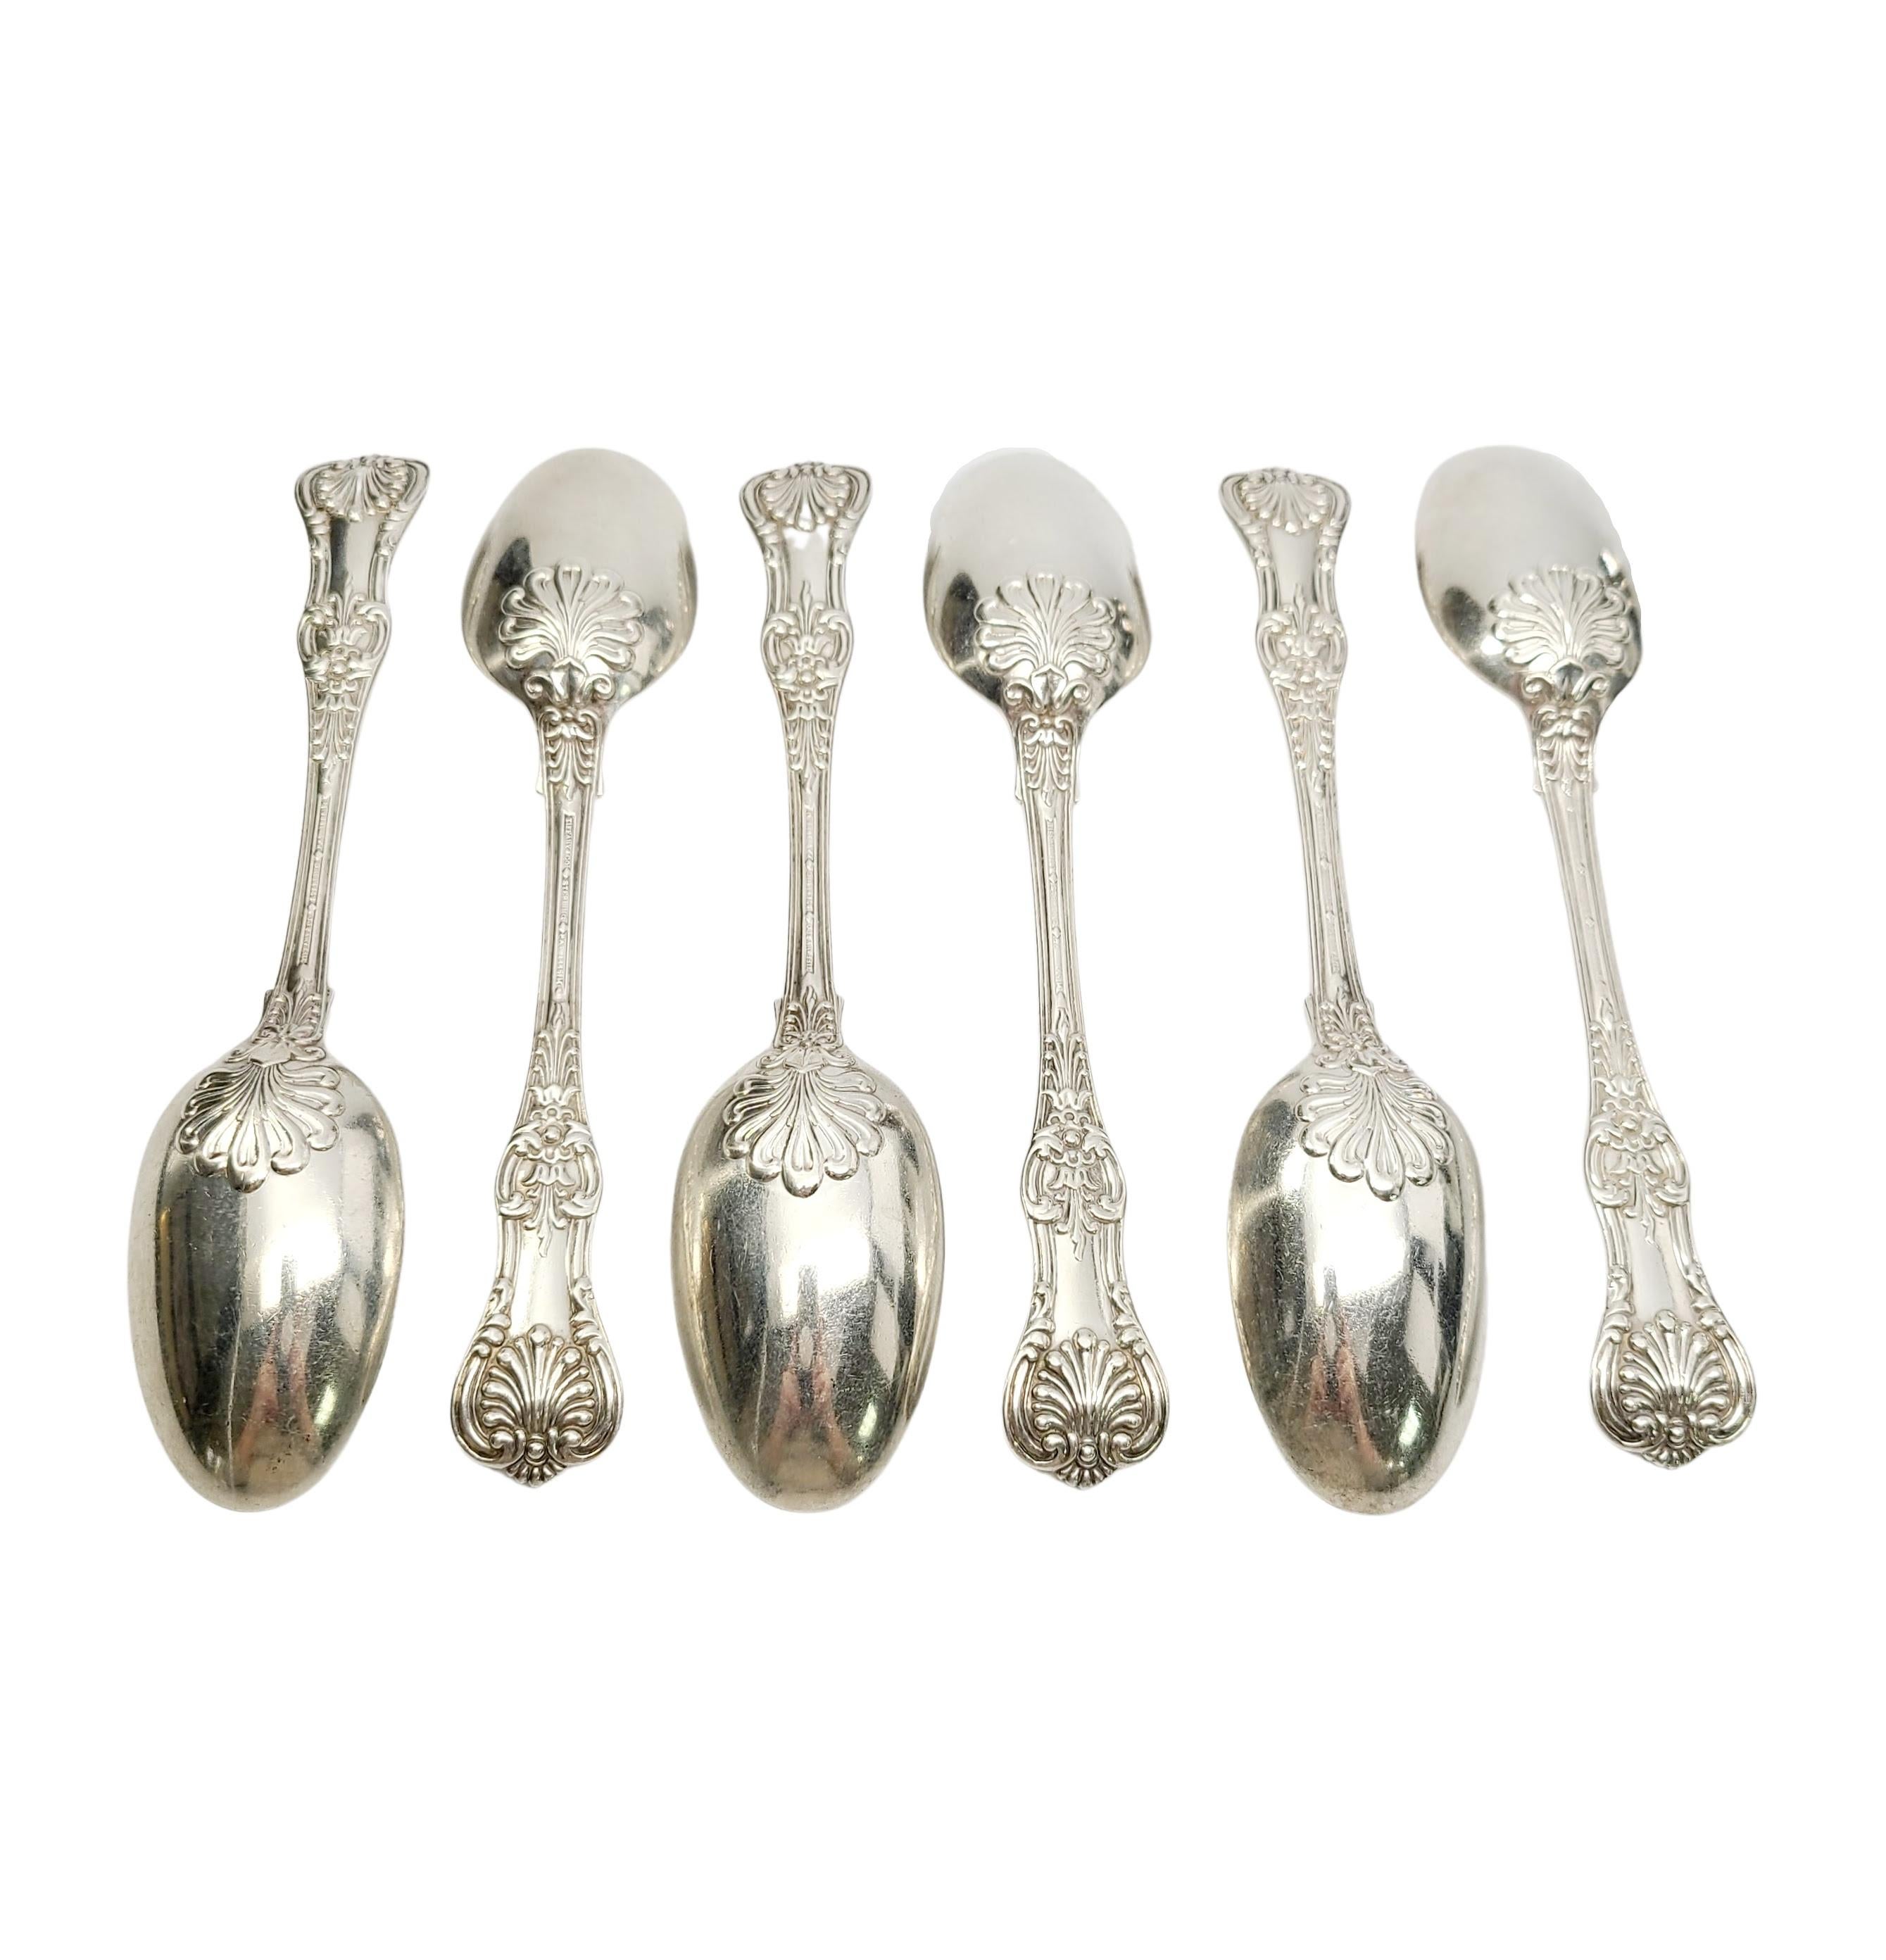 Set of 6 antique sterling silver dessert/oval soup spoons by Tiffany & Co in the English King pattern.

Monogram appears to be DH (see photos).

Beautiful spoons in Tiffany's intricate and decorative version of a King pattern which were very